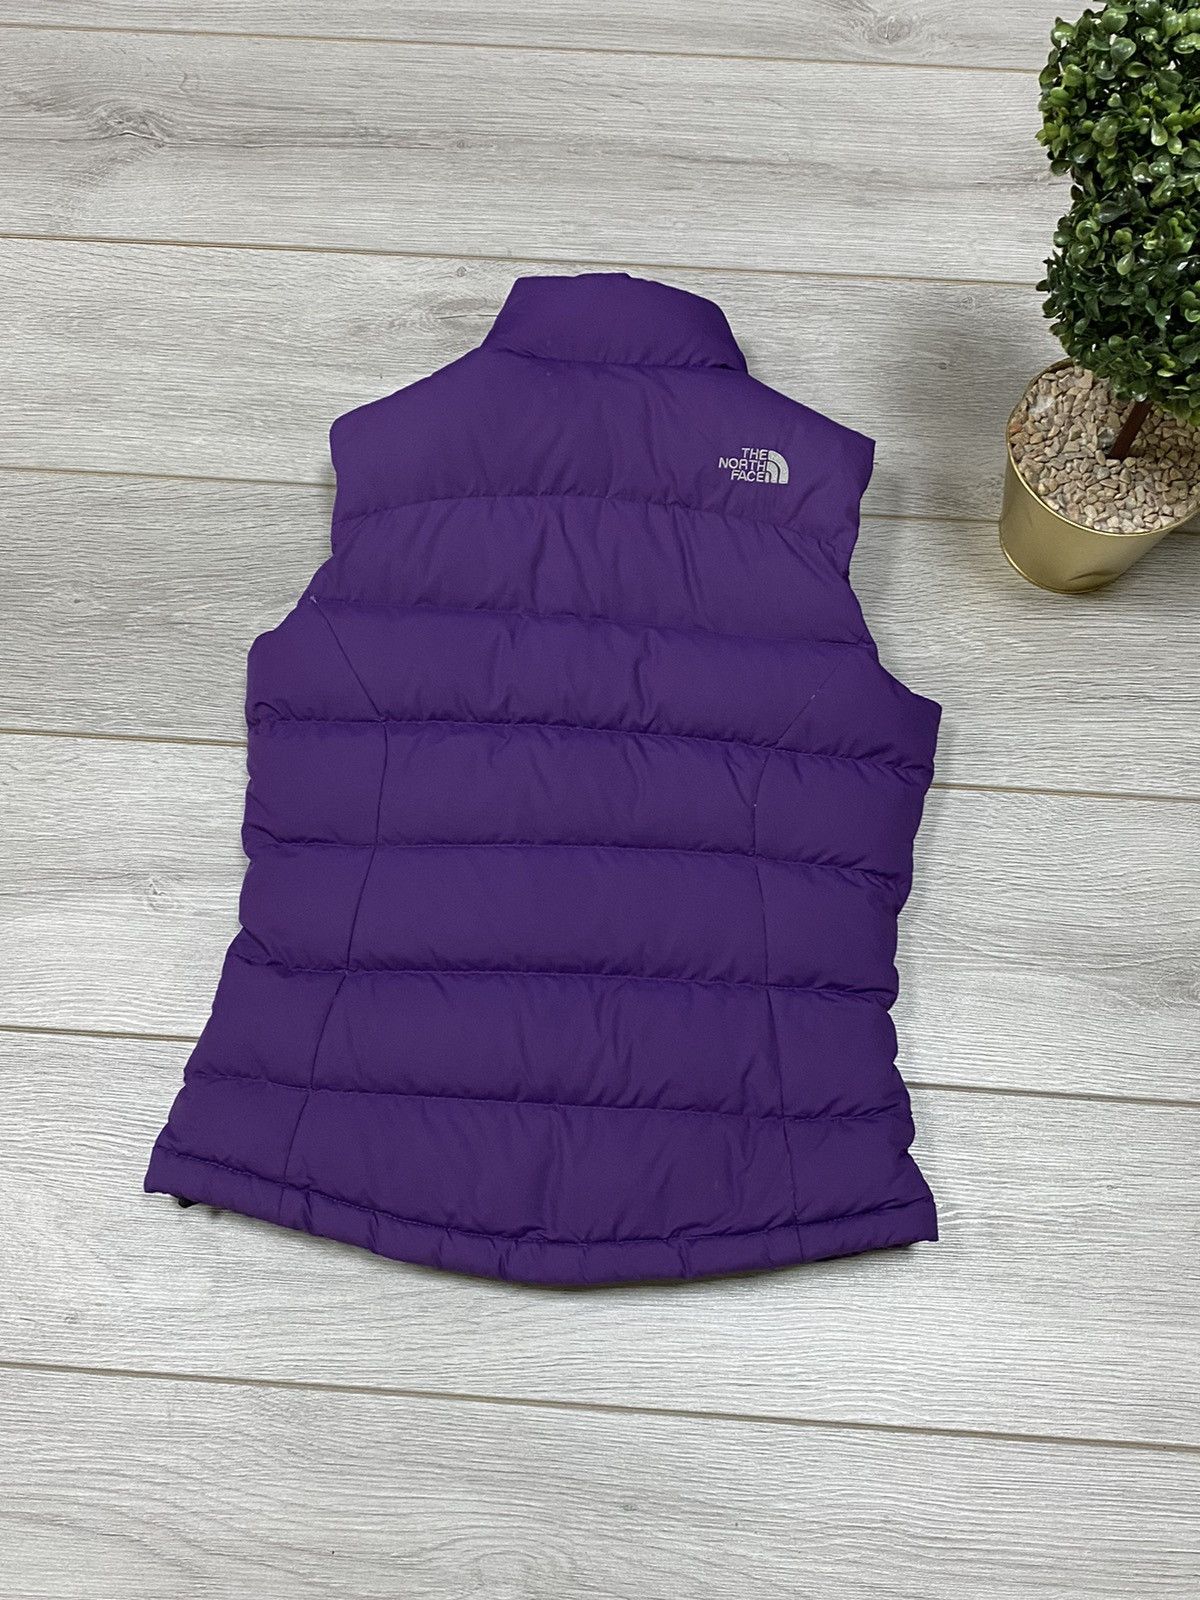 The North Face The North Face 700 purple women down vest Size XS / US 0-2 / IT 36-38 - 11 Preview